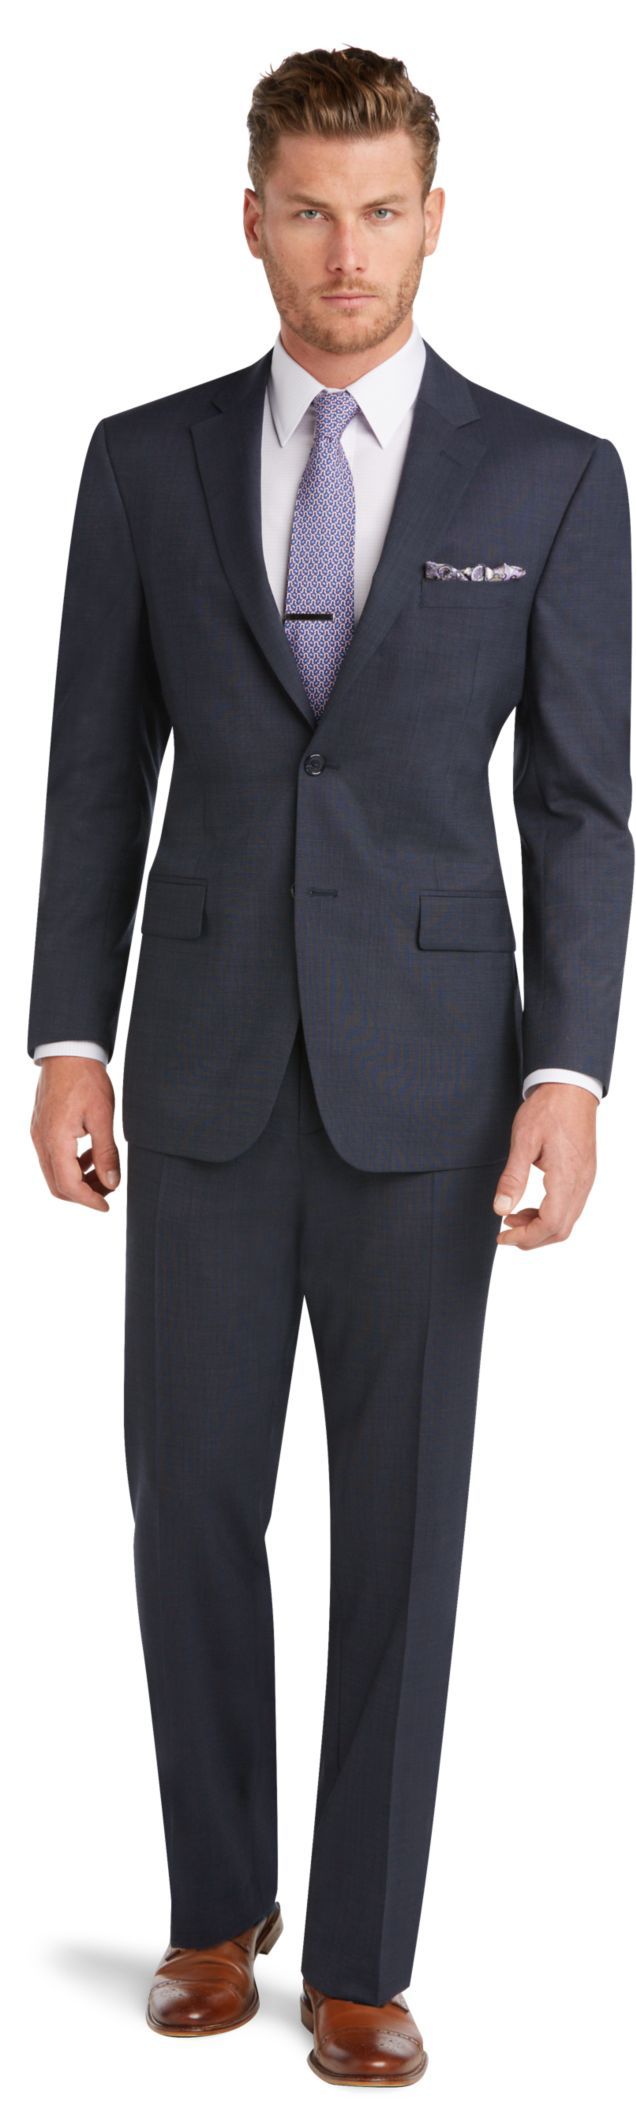 Executive Collection Regal Fit Suit - Big & Tall Suits | Jos A Bank